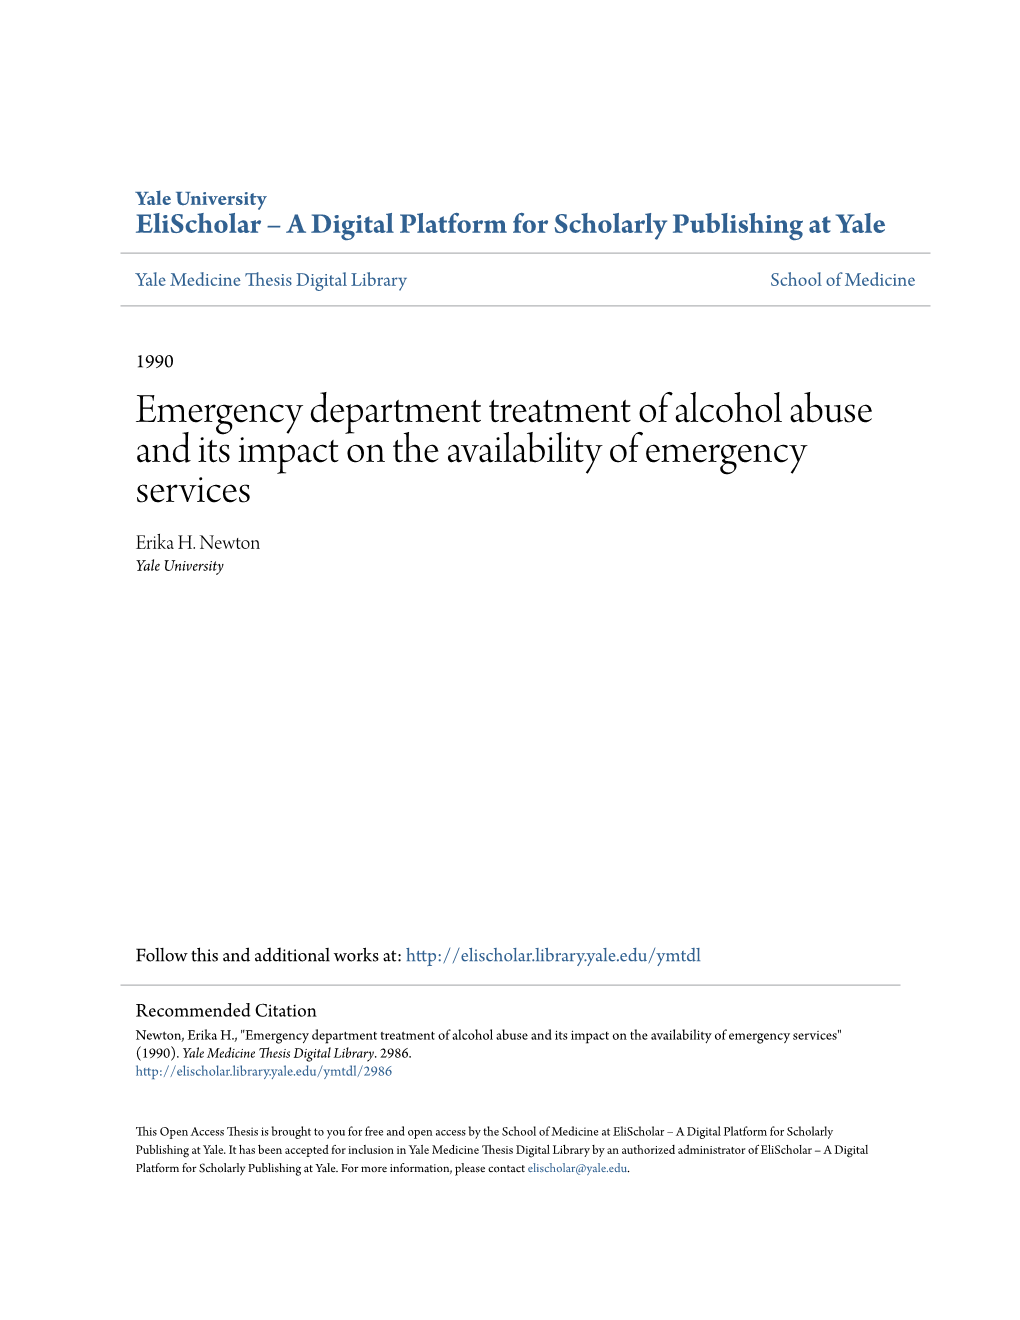 Emergency Department Treatment of Alcohol Abuse and Its Impact on the Availability of Emergency Services Erika H